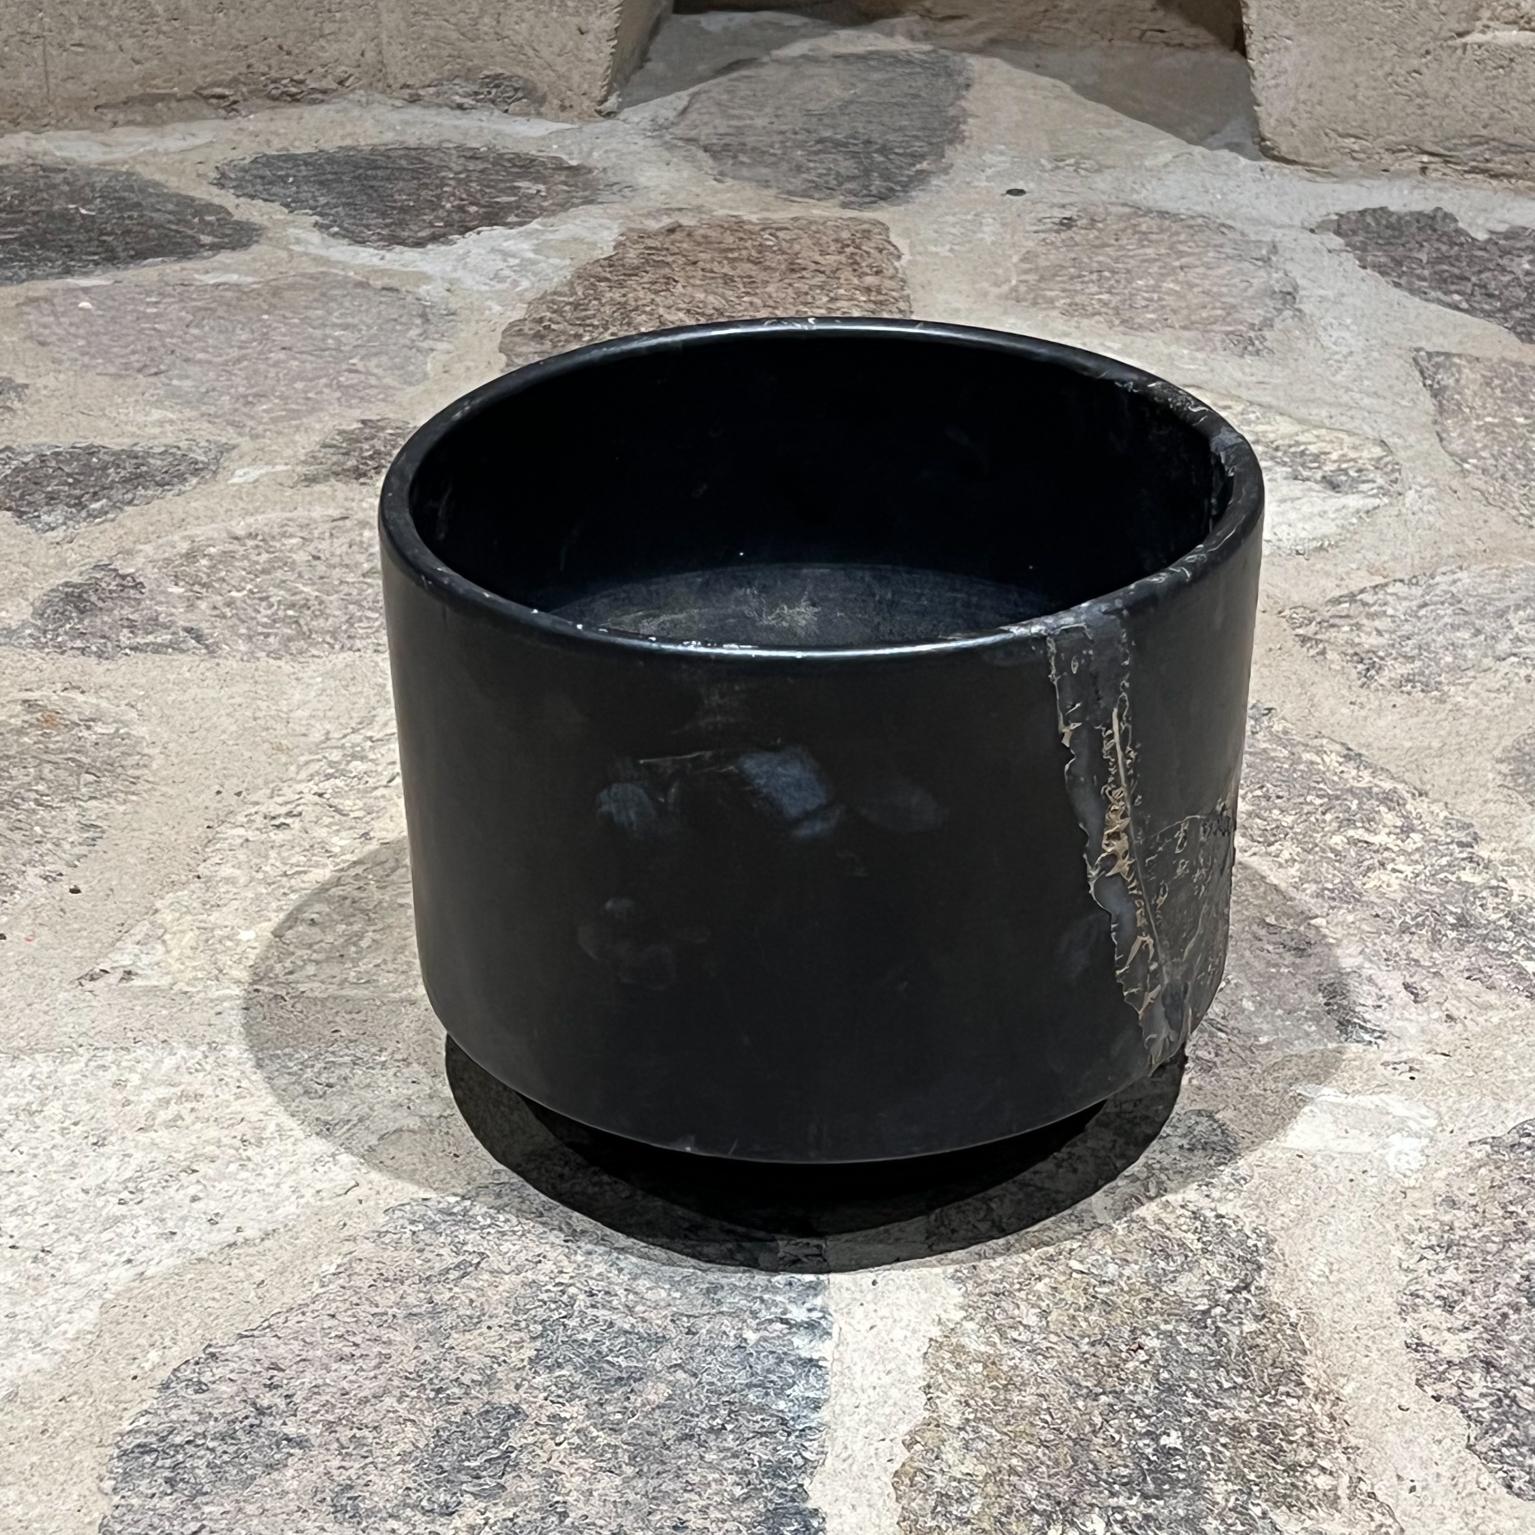 1960s Modern matte black mid-century architectural planter pot.
8 tall x 9.75 diameter.
Black planter garden patio home.
Style of Gainey Pottery. Signed underneath with maker's label.
Original preowned unrestored vintage condition.
See images